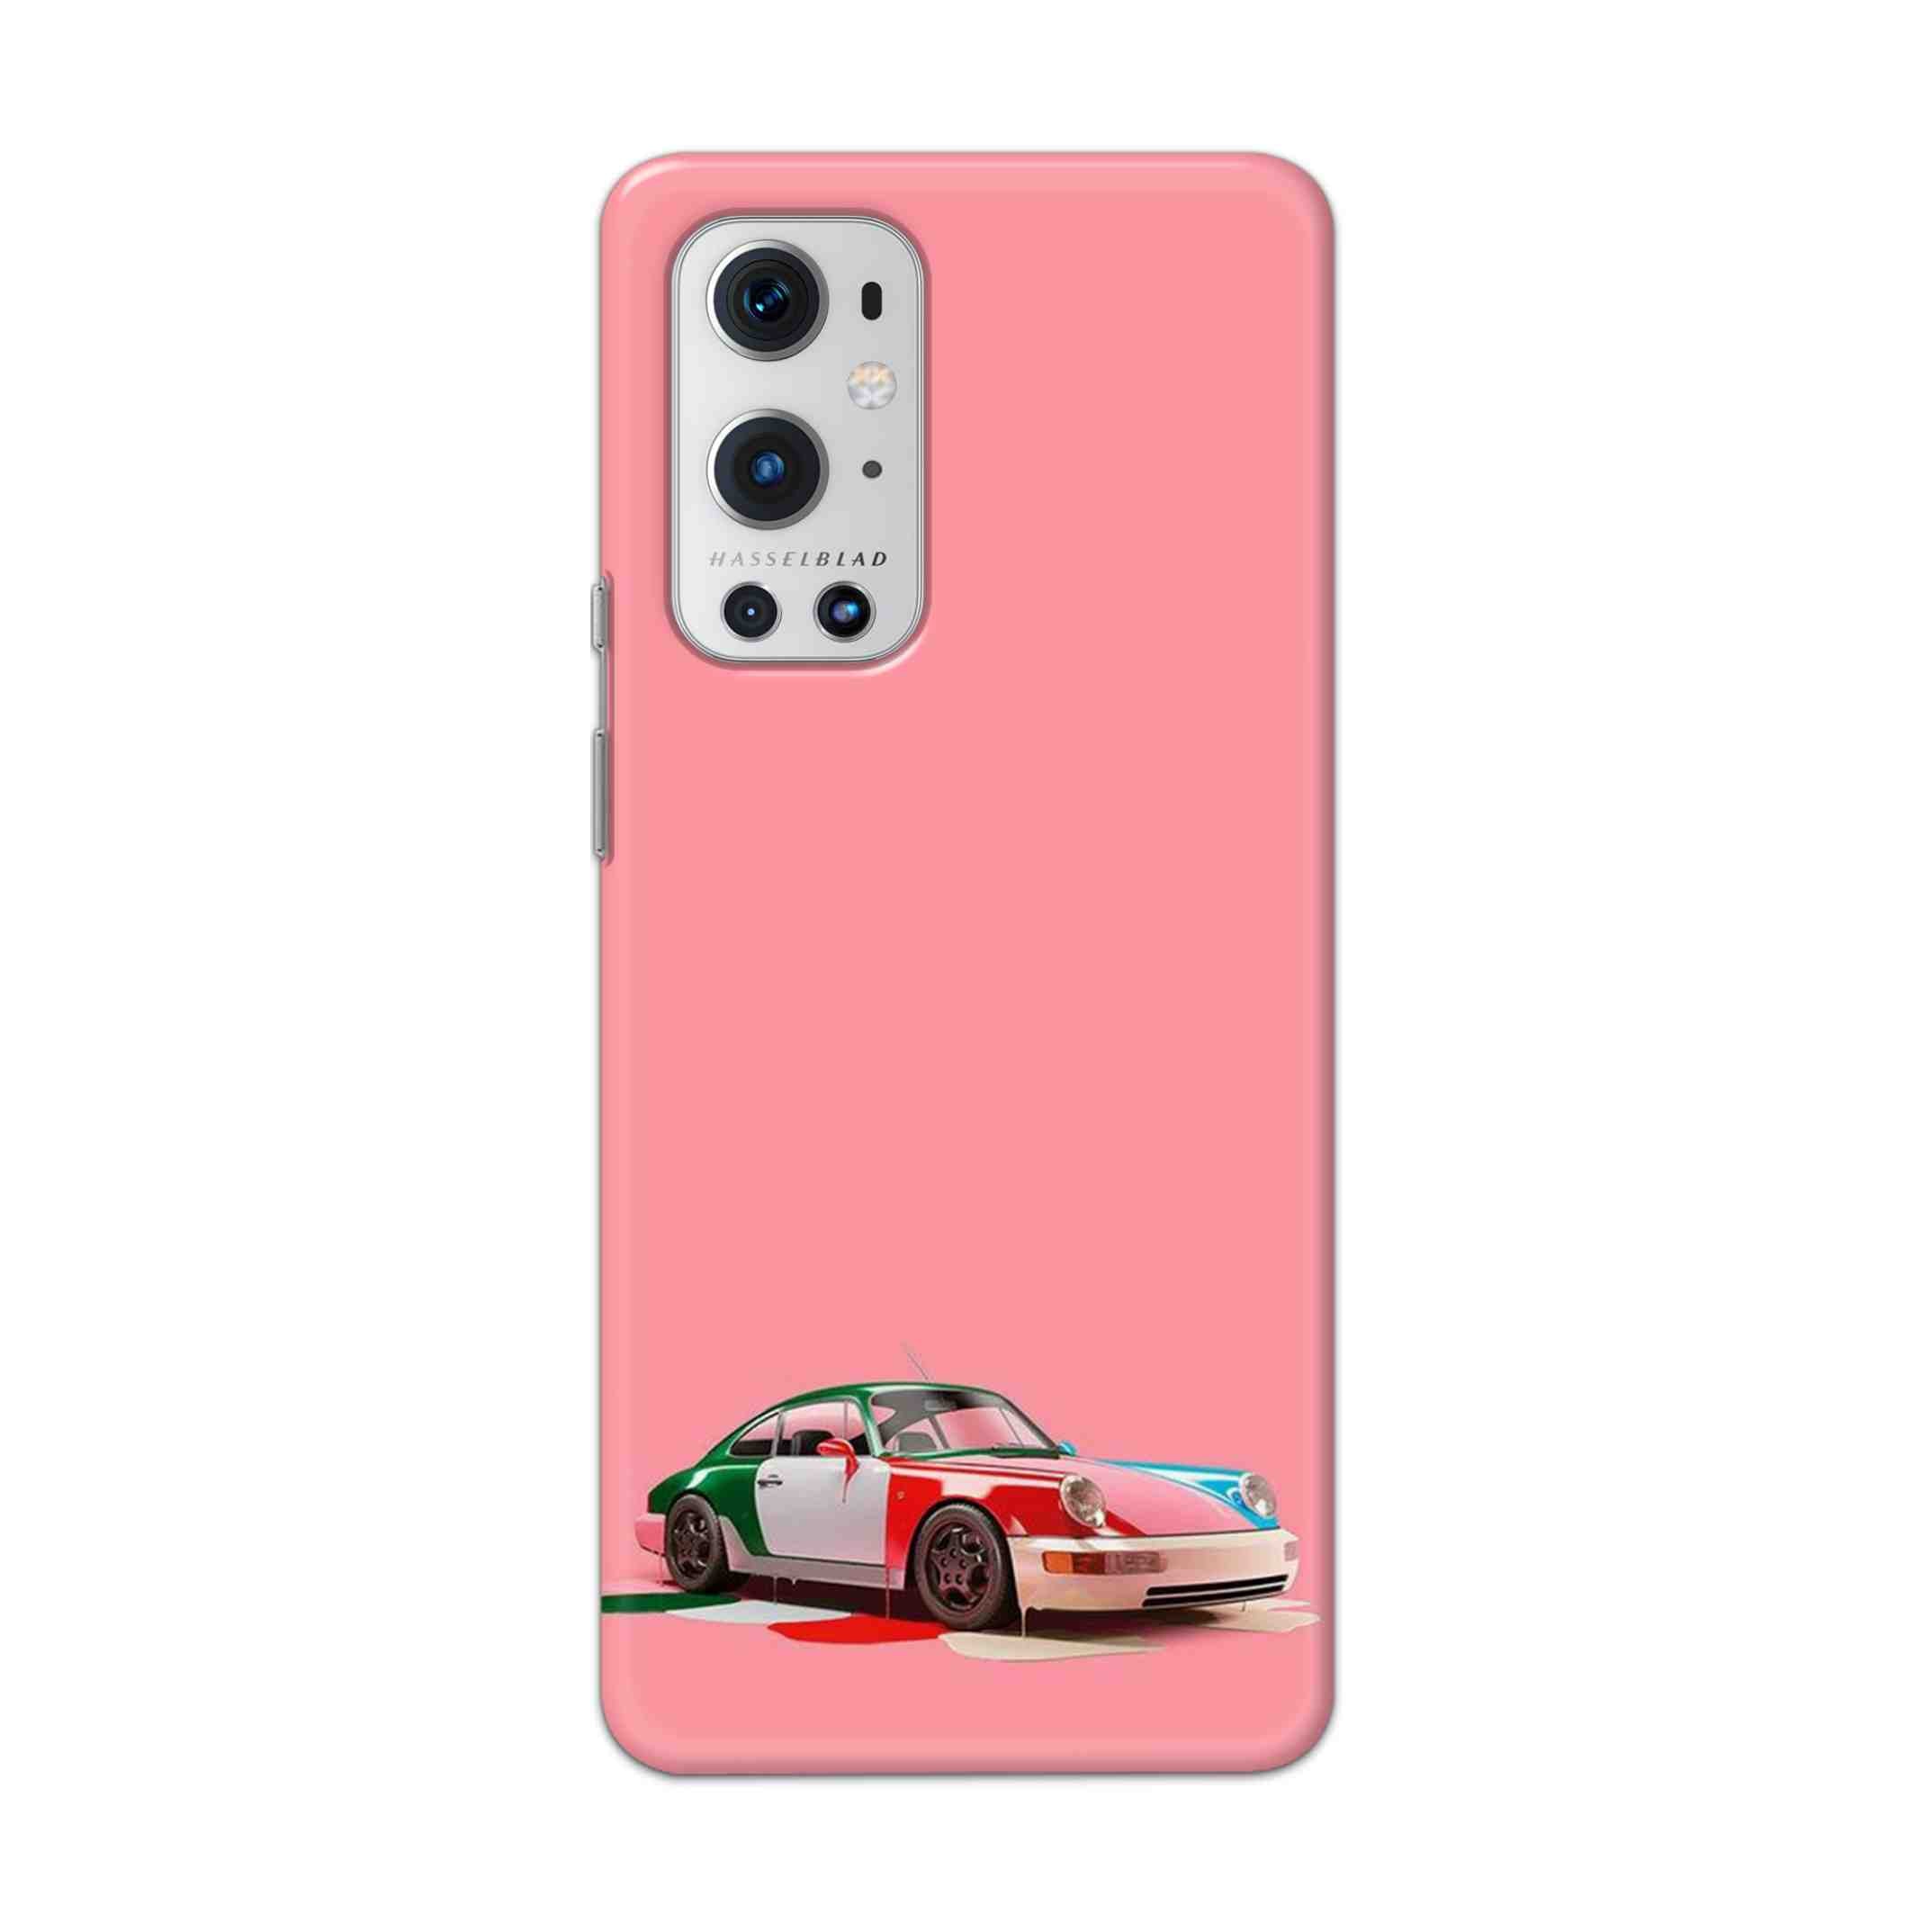 Buy Pink Porche Hard Back Mobile Phone Case Cover For OnePlus 9 Pro Online